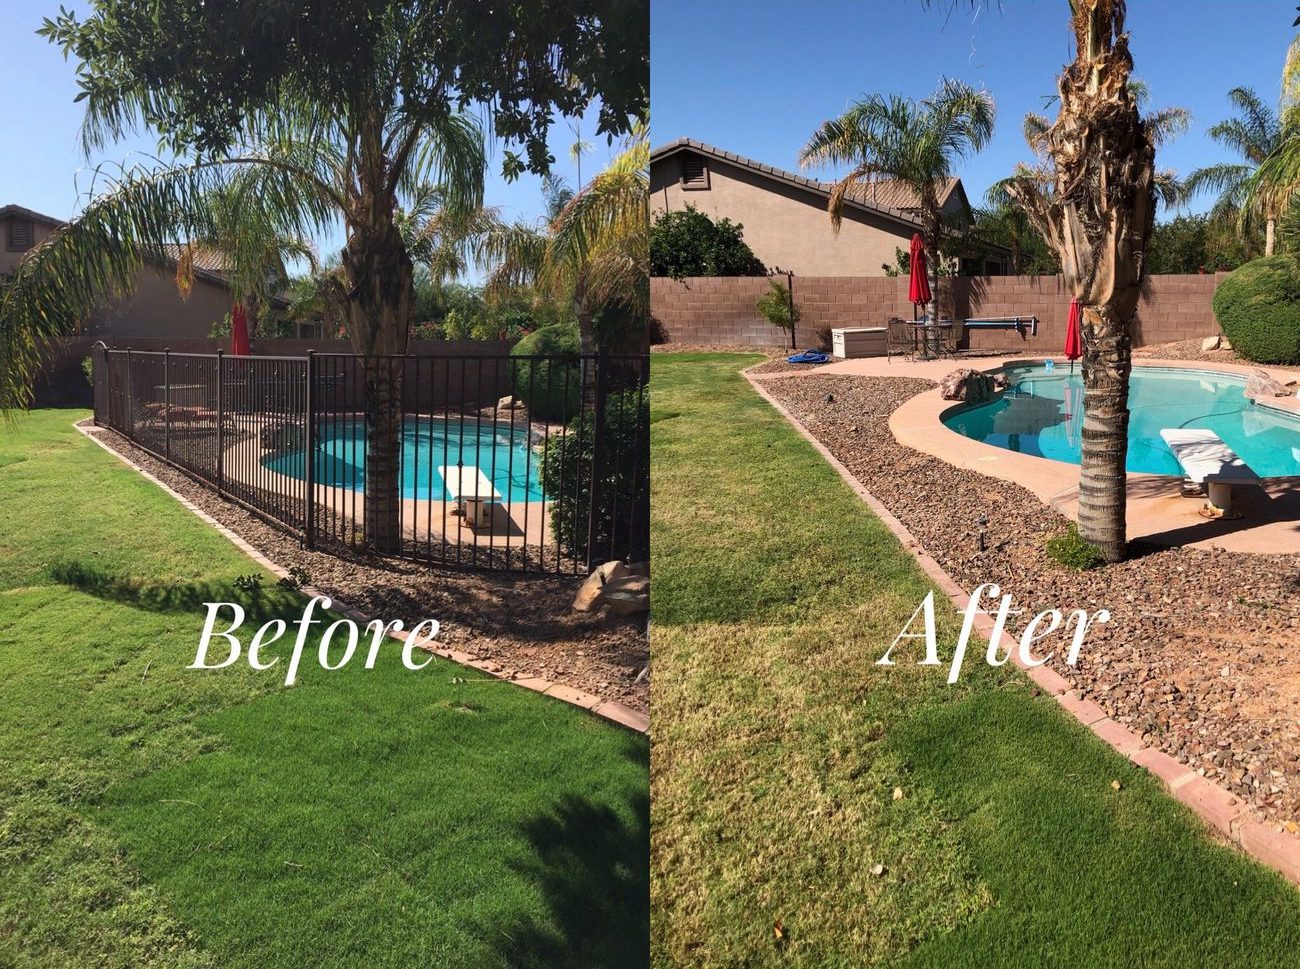 Fence Removal Before and After